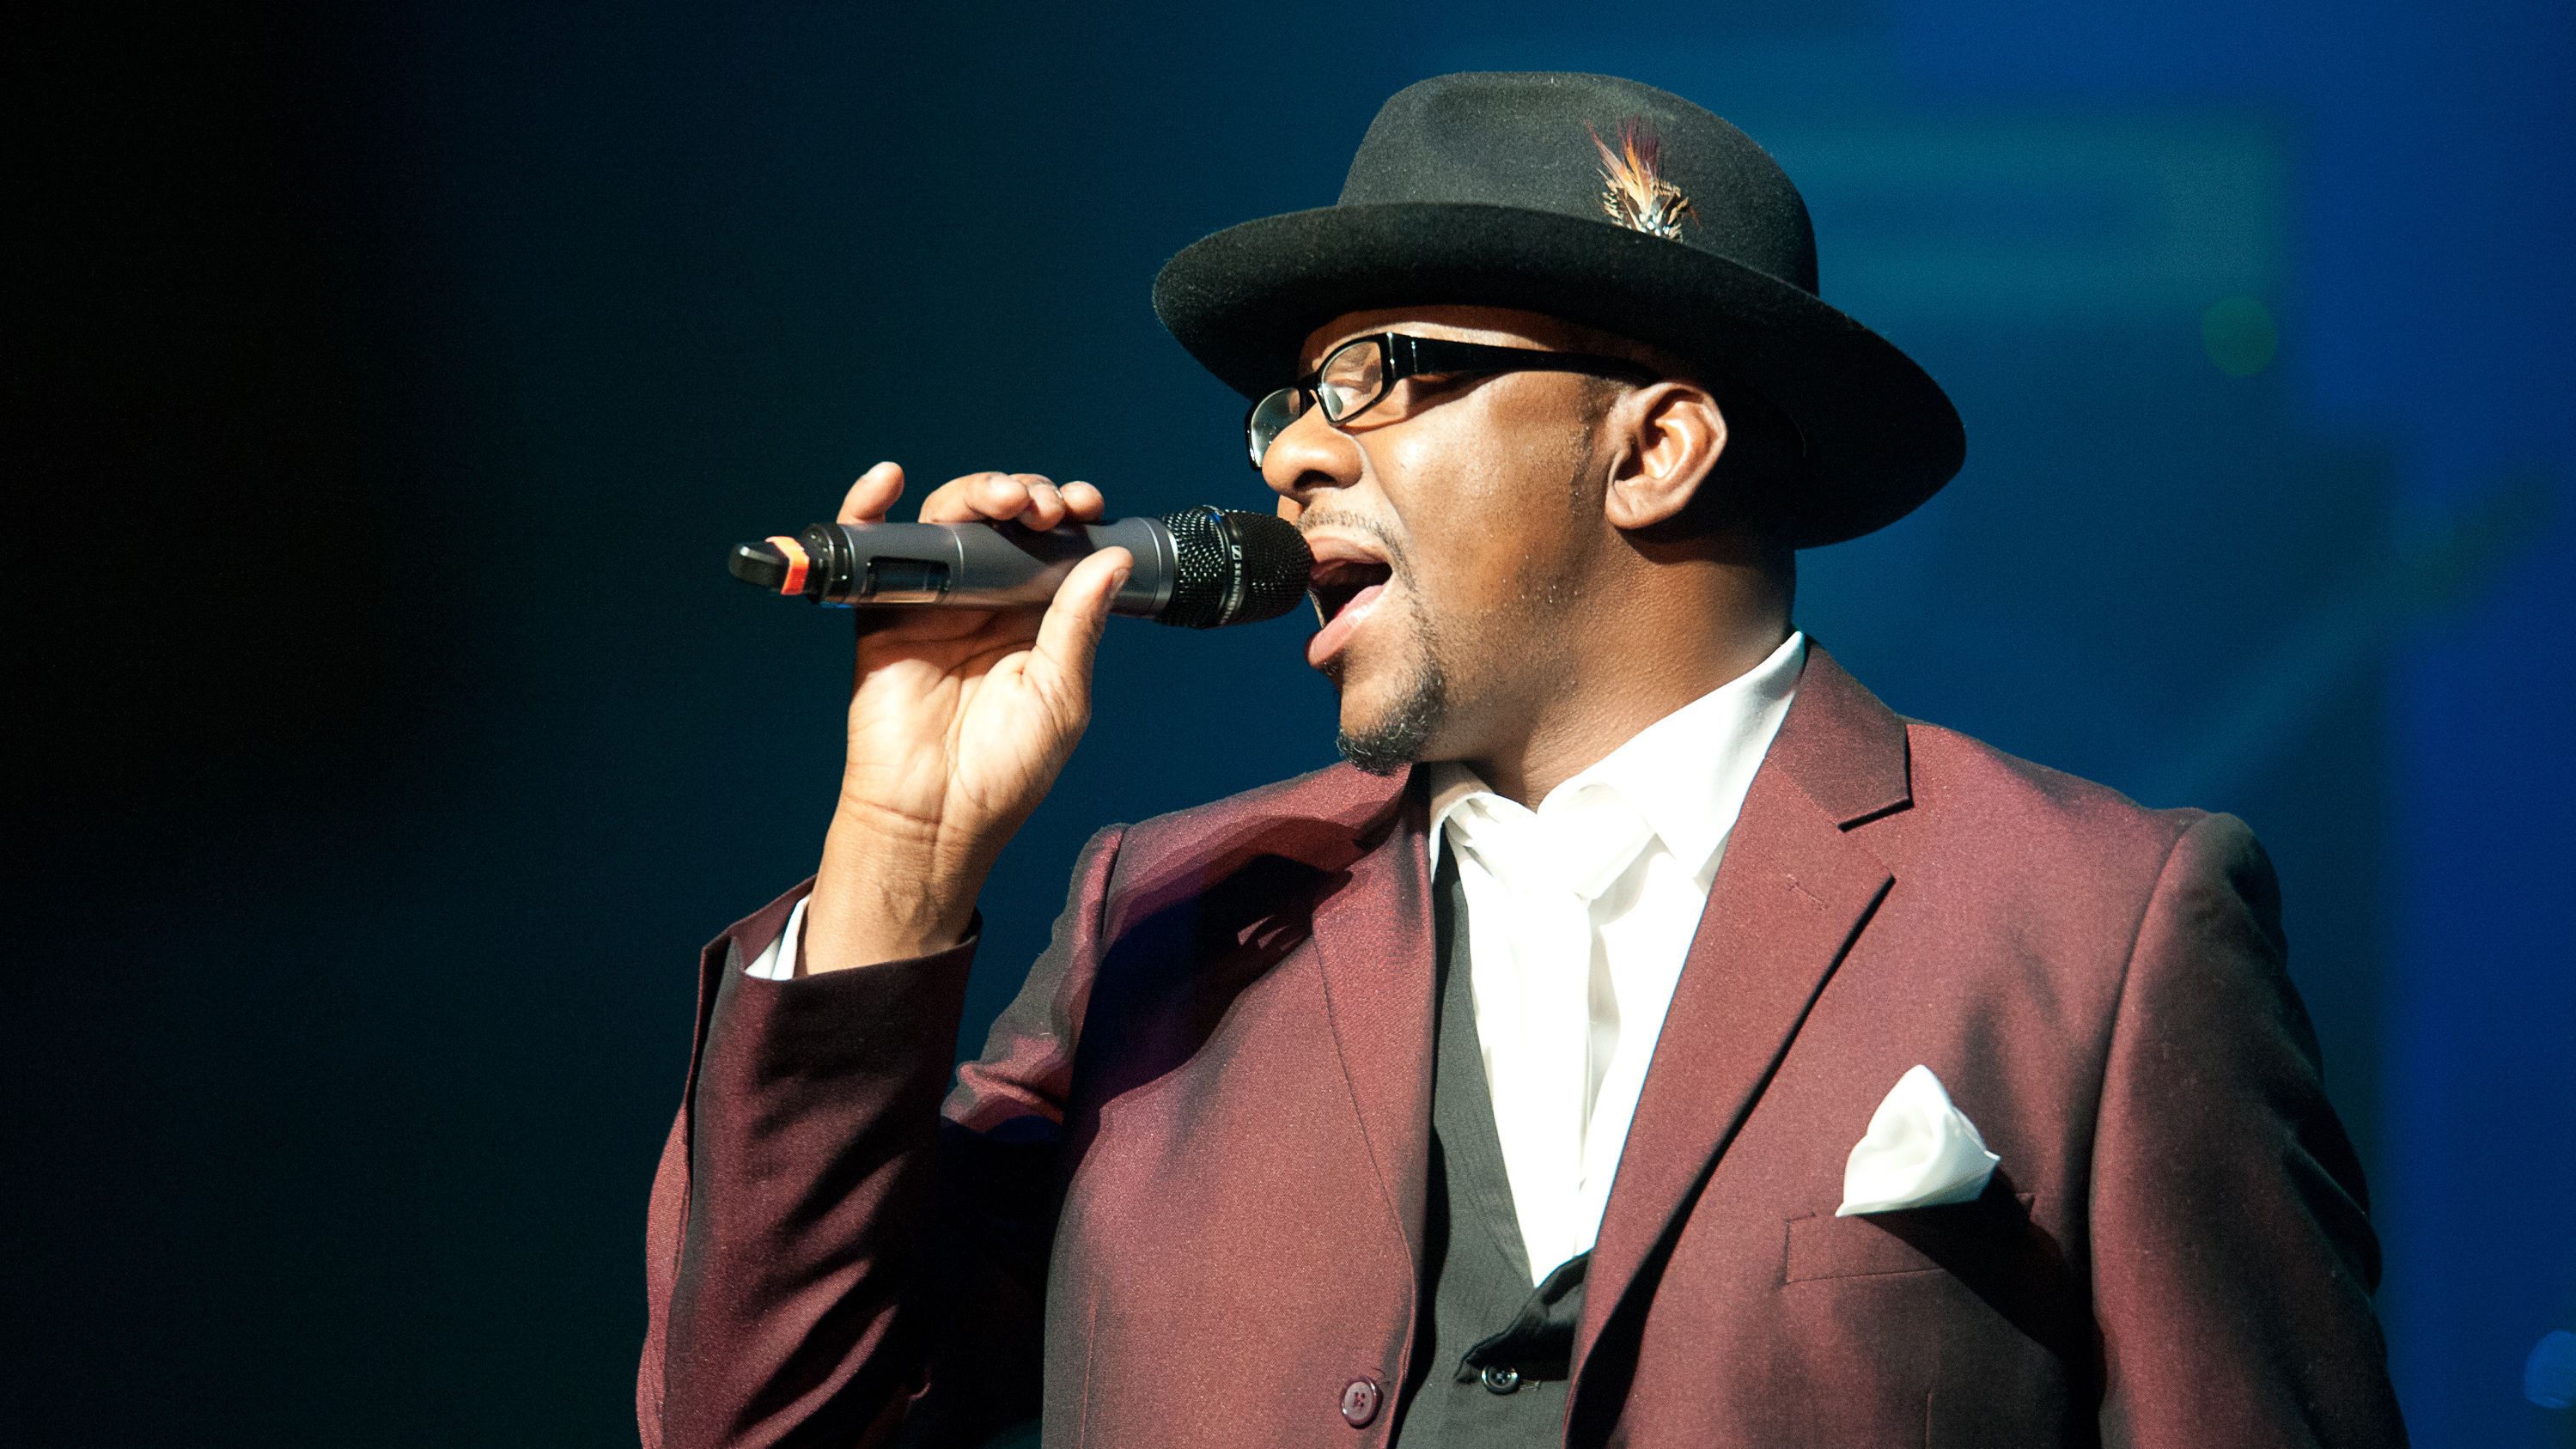  Bobby Brown performs at NJPAC Prudential Hall on February 19, 2012 in Newark, New Jersey.